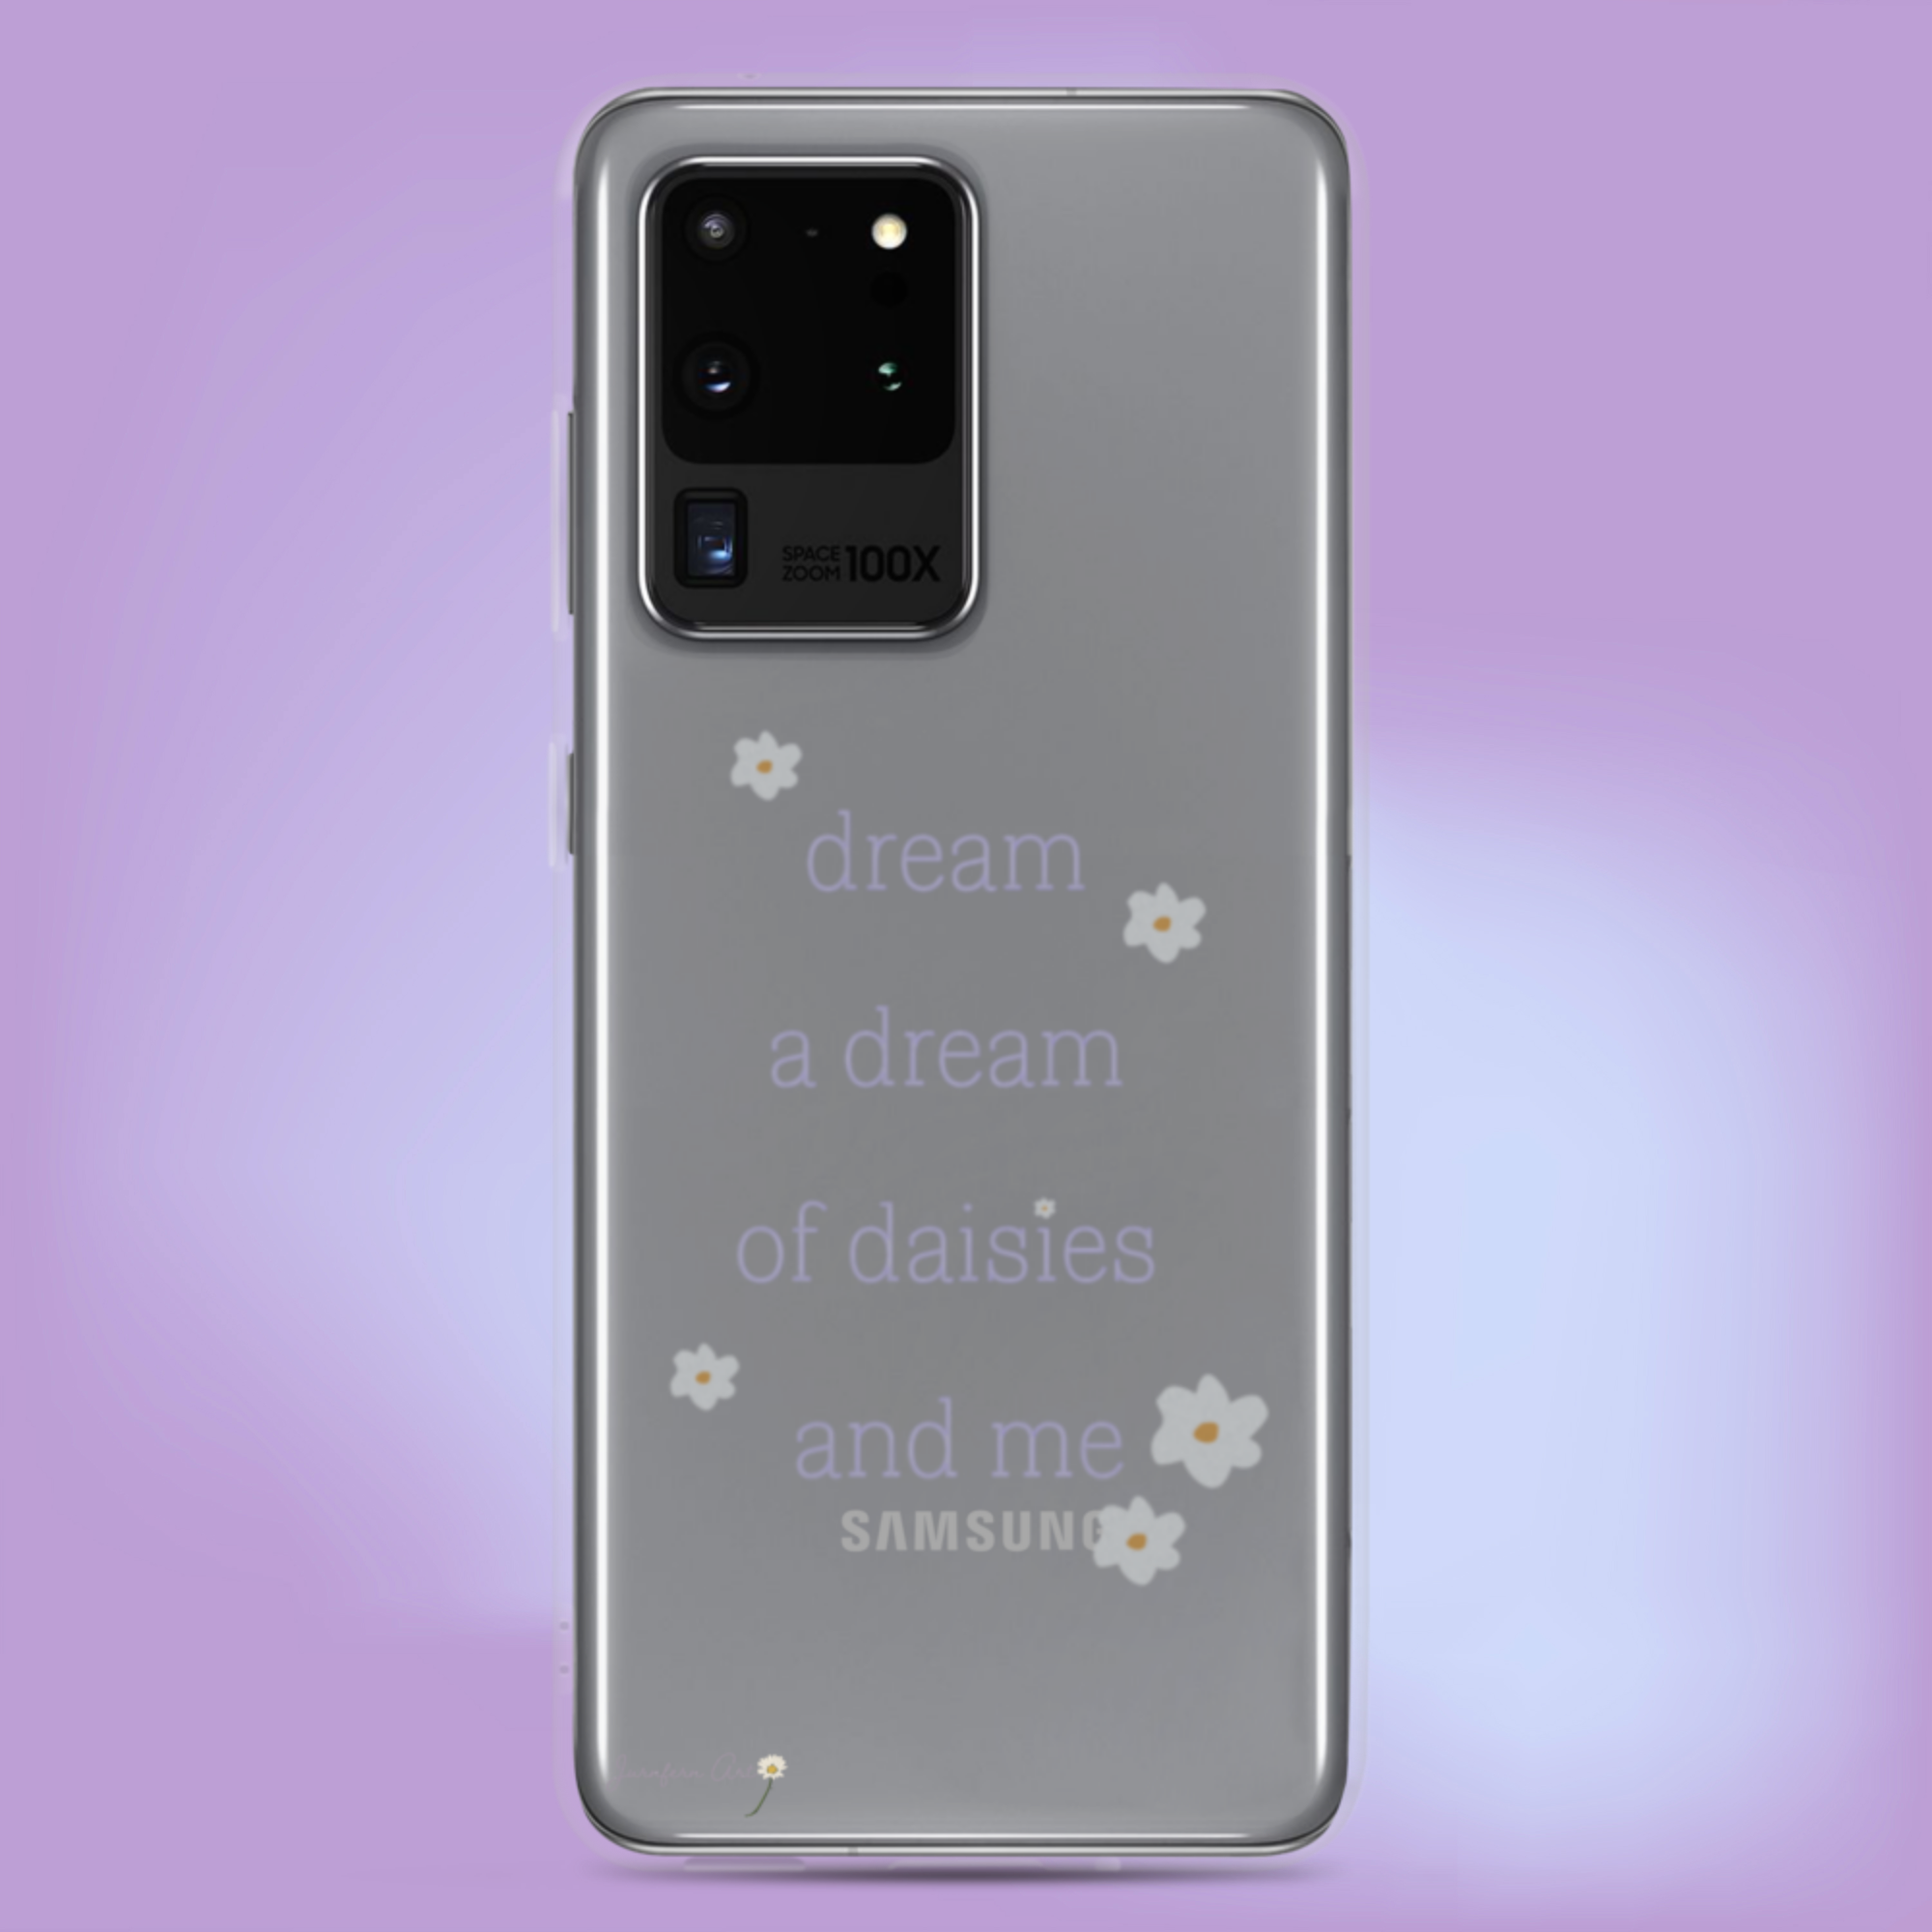 A transparent Samsung Galaxy S20 Ultra phone case with lavender text on it that reads "dream a dream of daisies and me" surrounded by small daisies